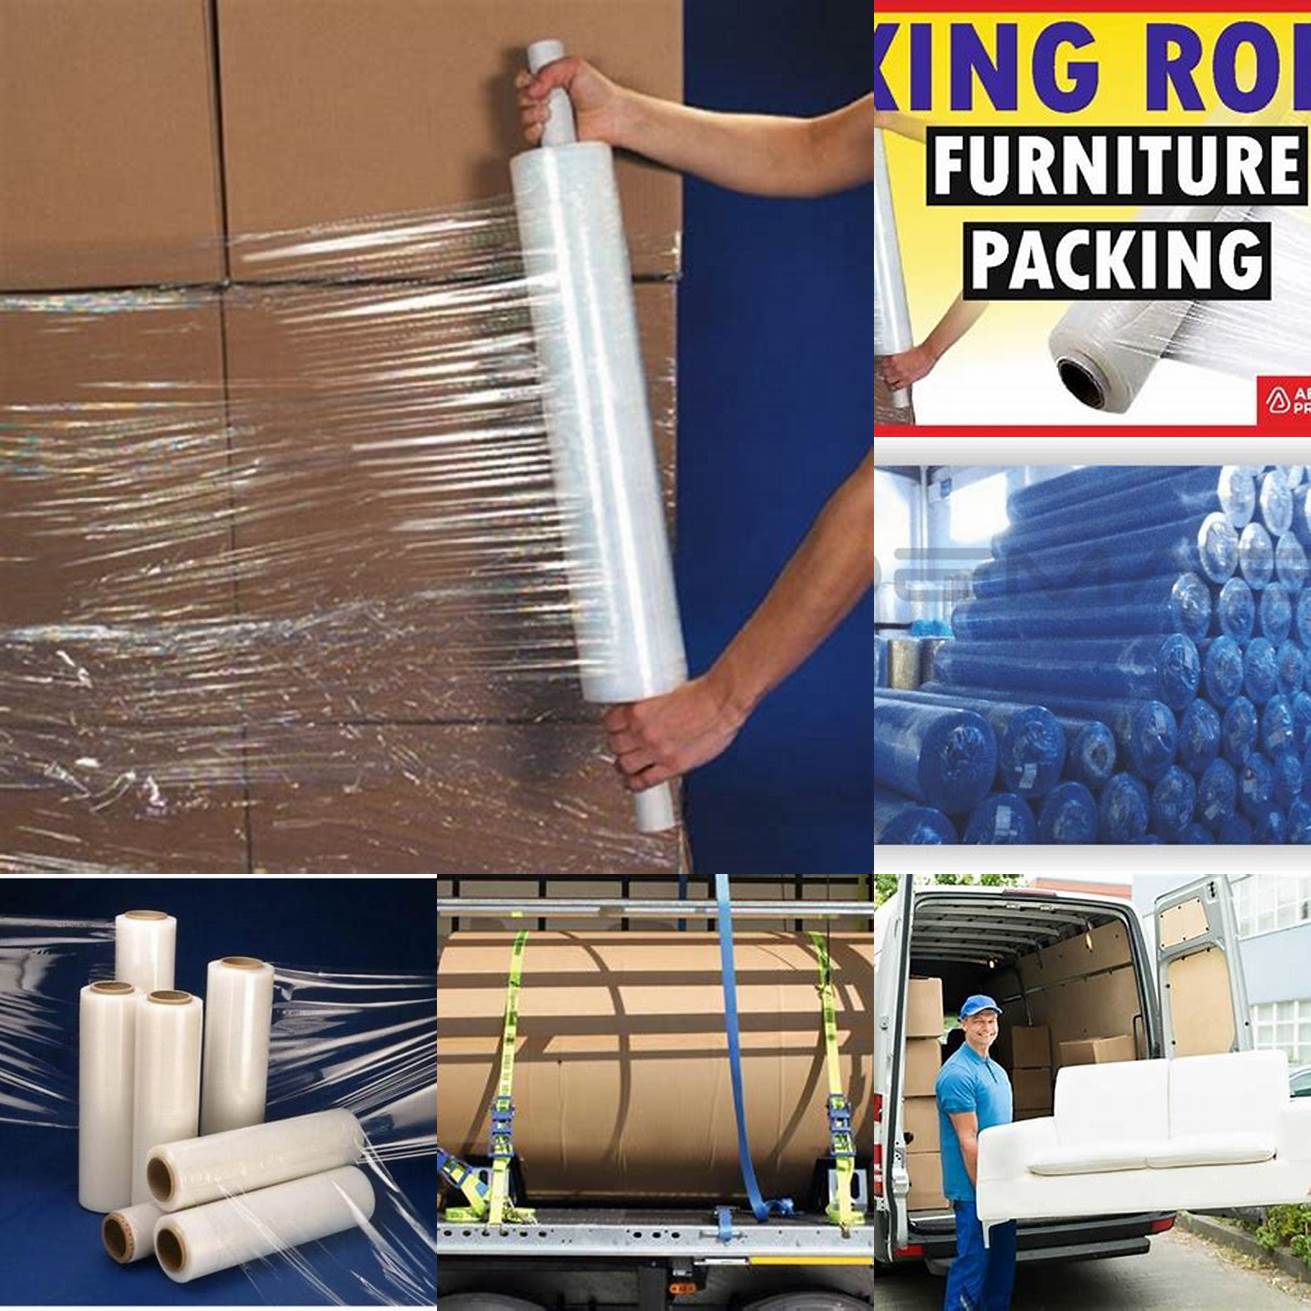 Transporting the roll packaging